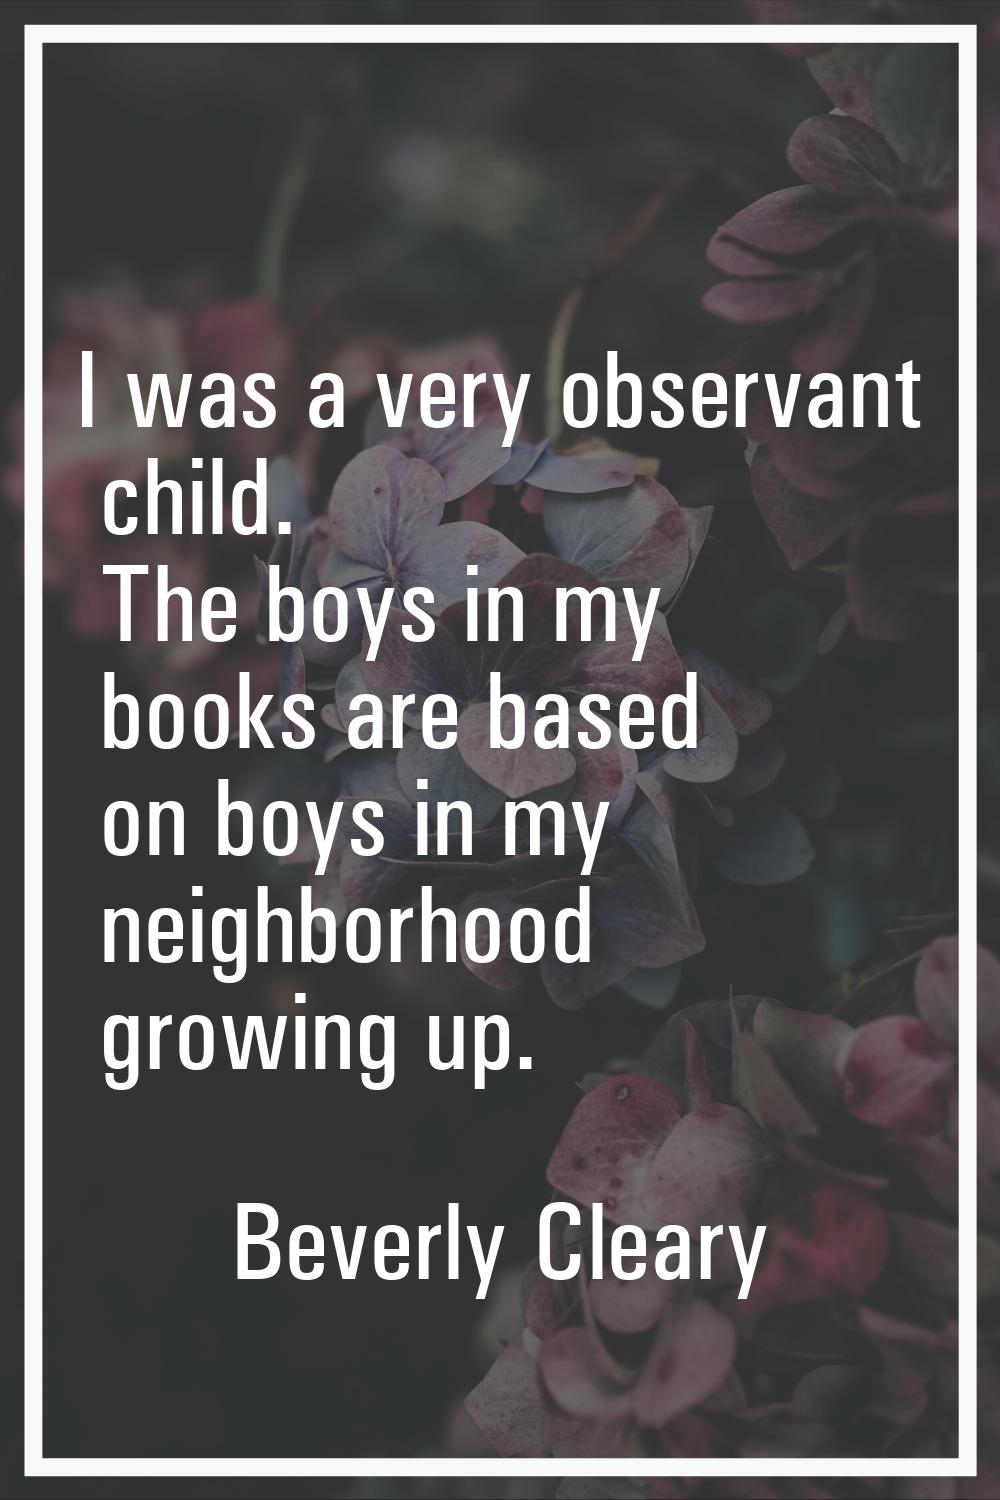 I was a very observant child. The boys in my books are based on boys in my neighborhood growing up.